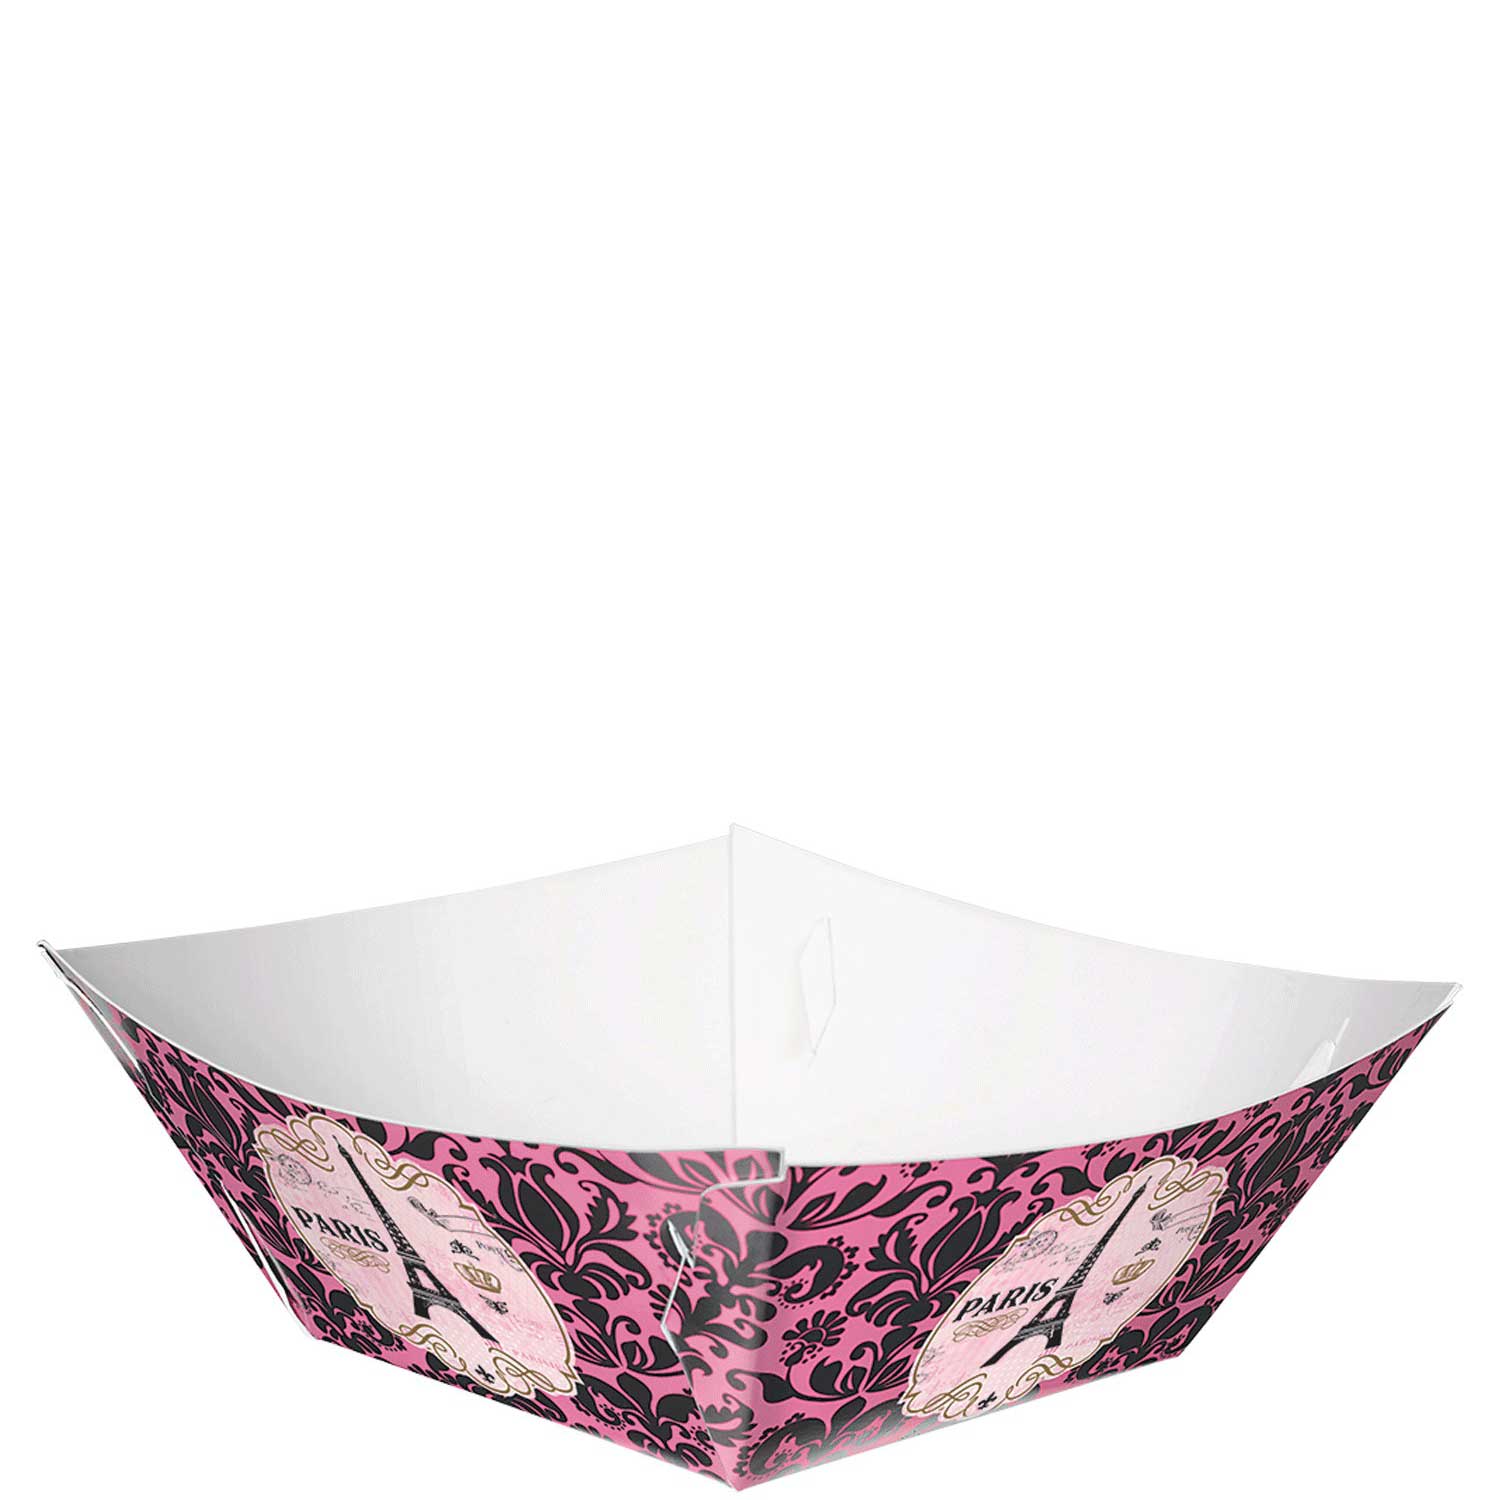 A Day In Paris Paper Snack Bowls 3pcs Candy Buffet - Party Centre - Party Centre